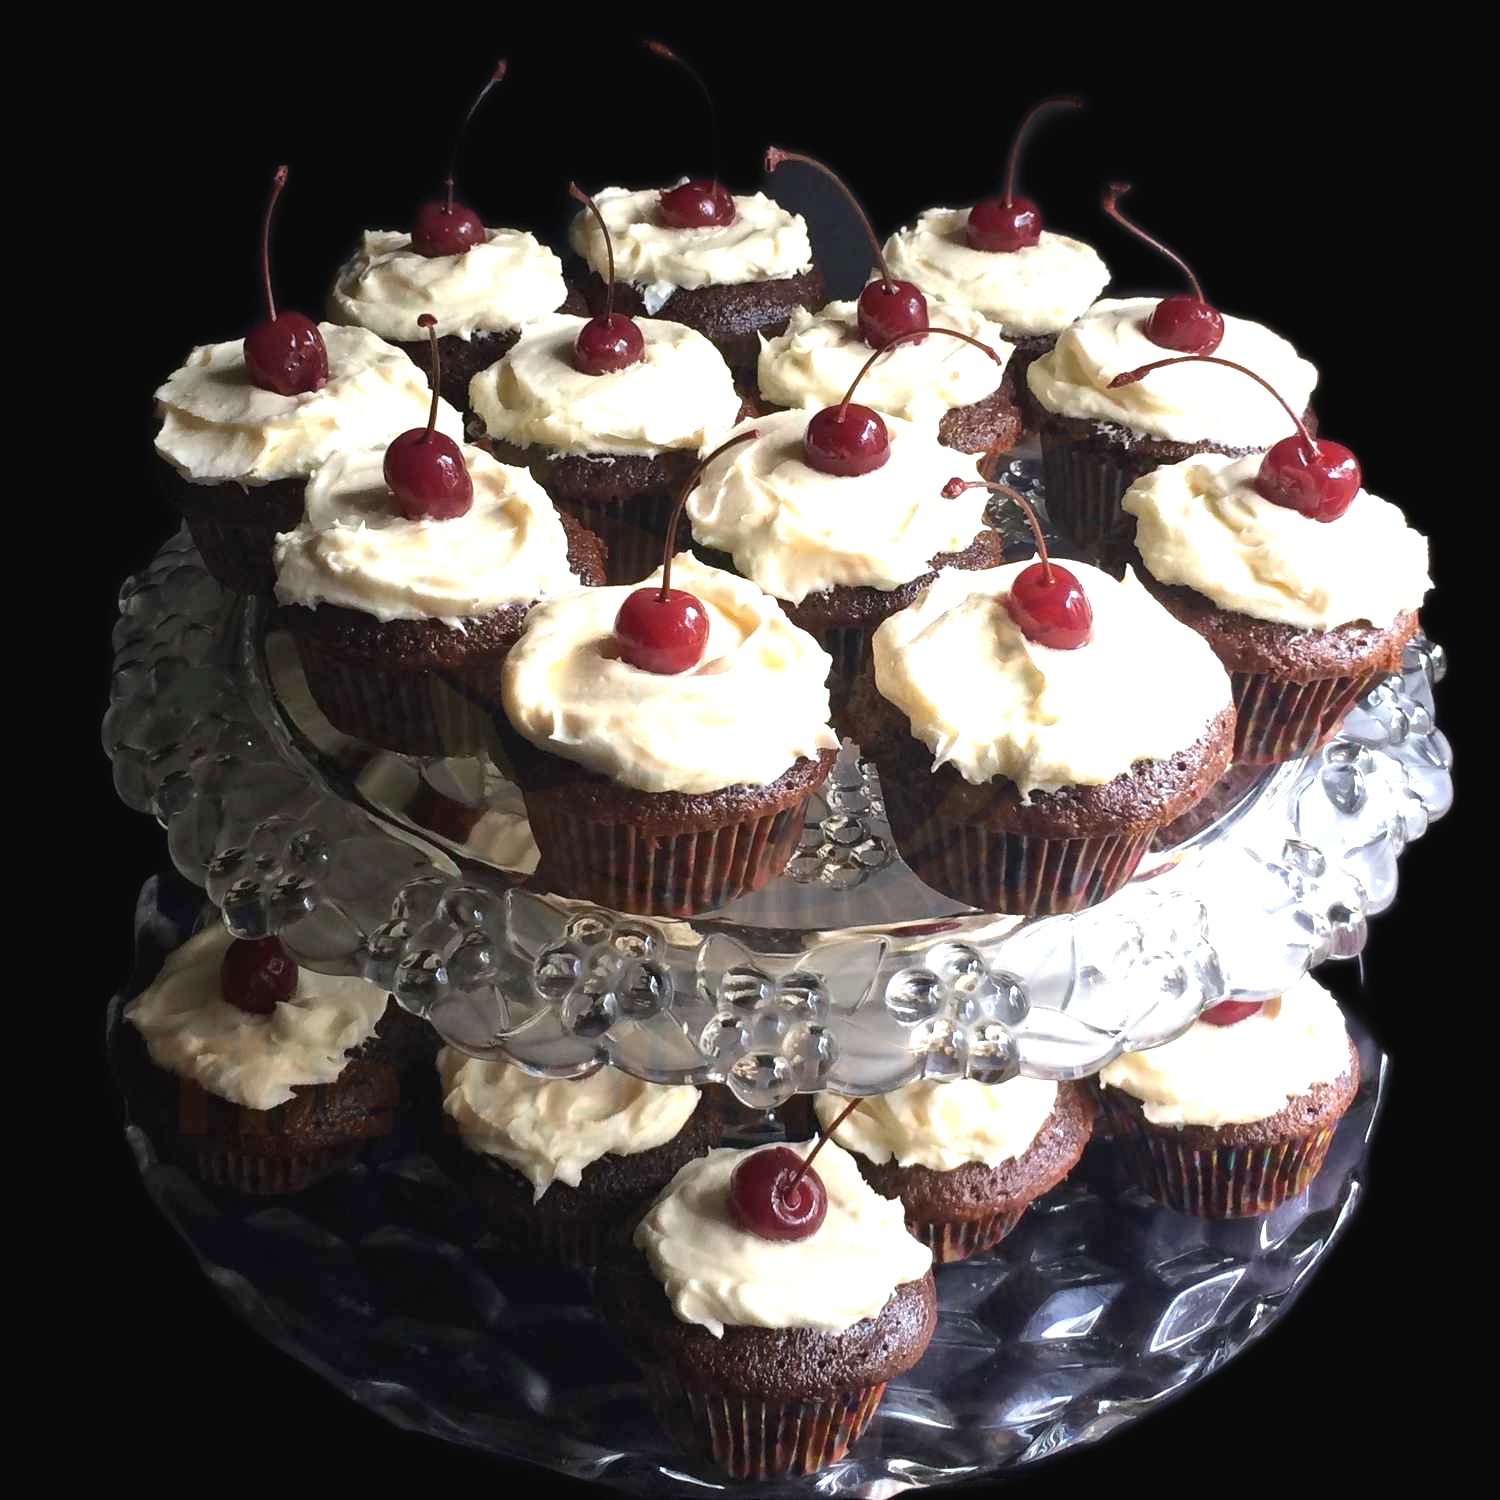 Chocolate-Cherry Cupcakes with Cream Cheese Buttercream Frosting